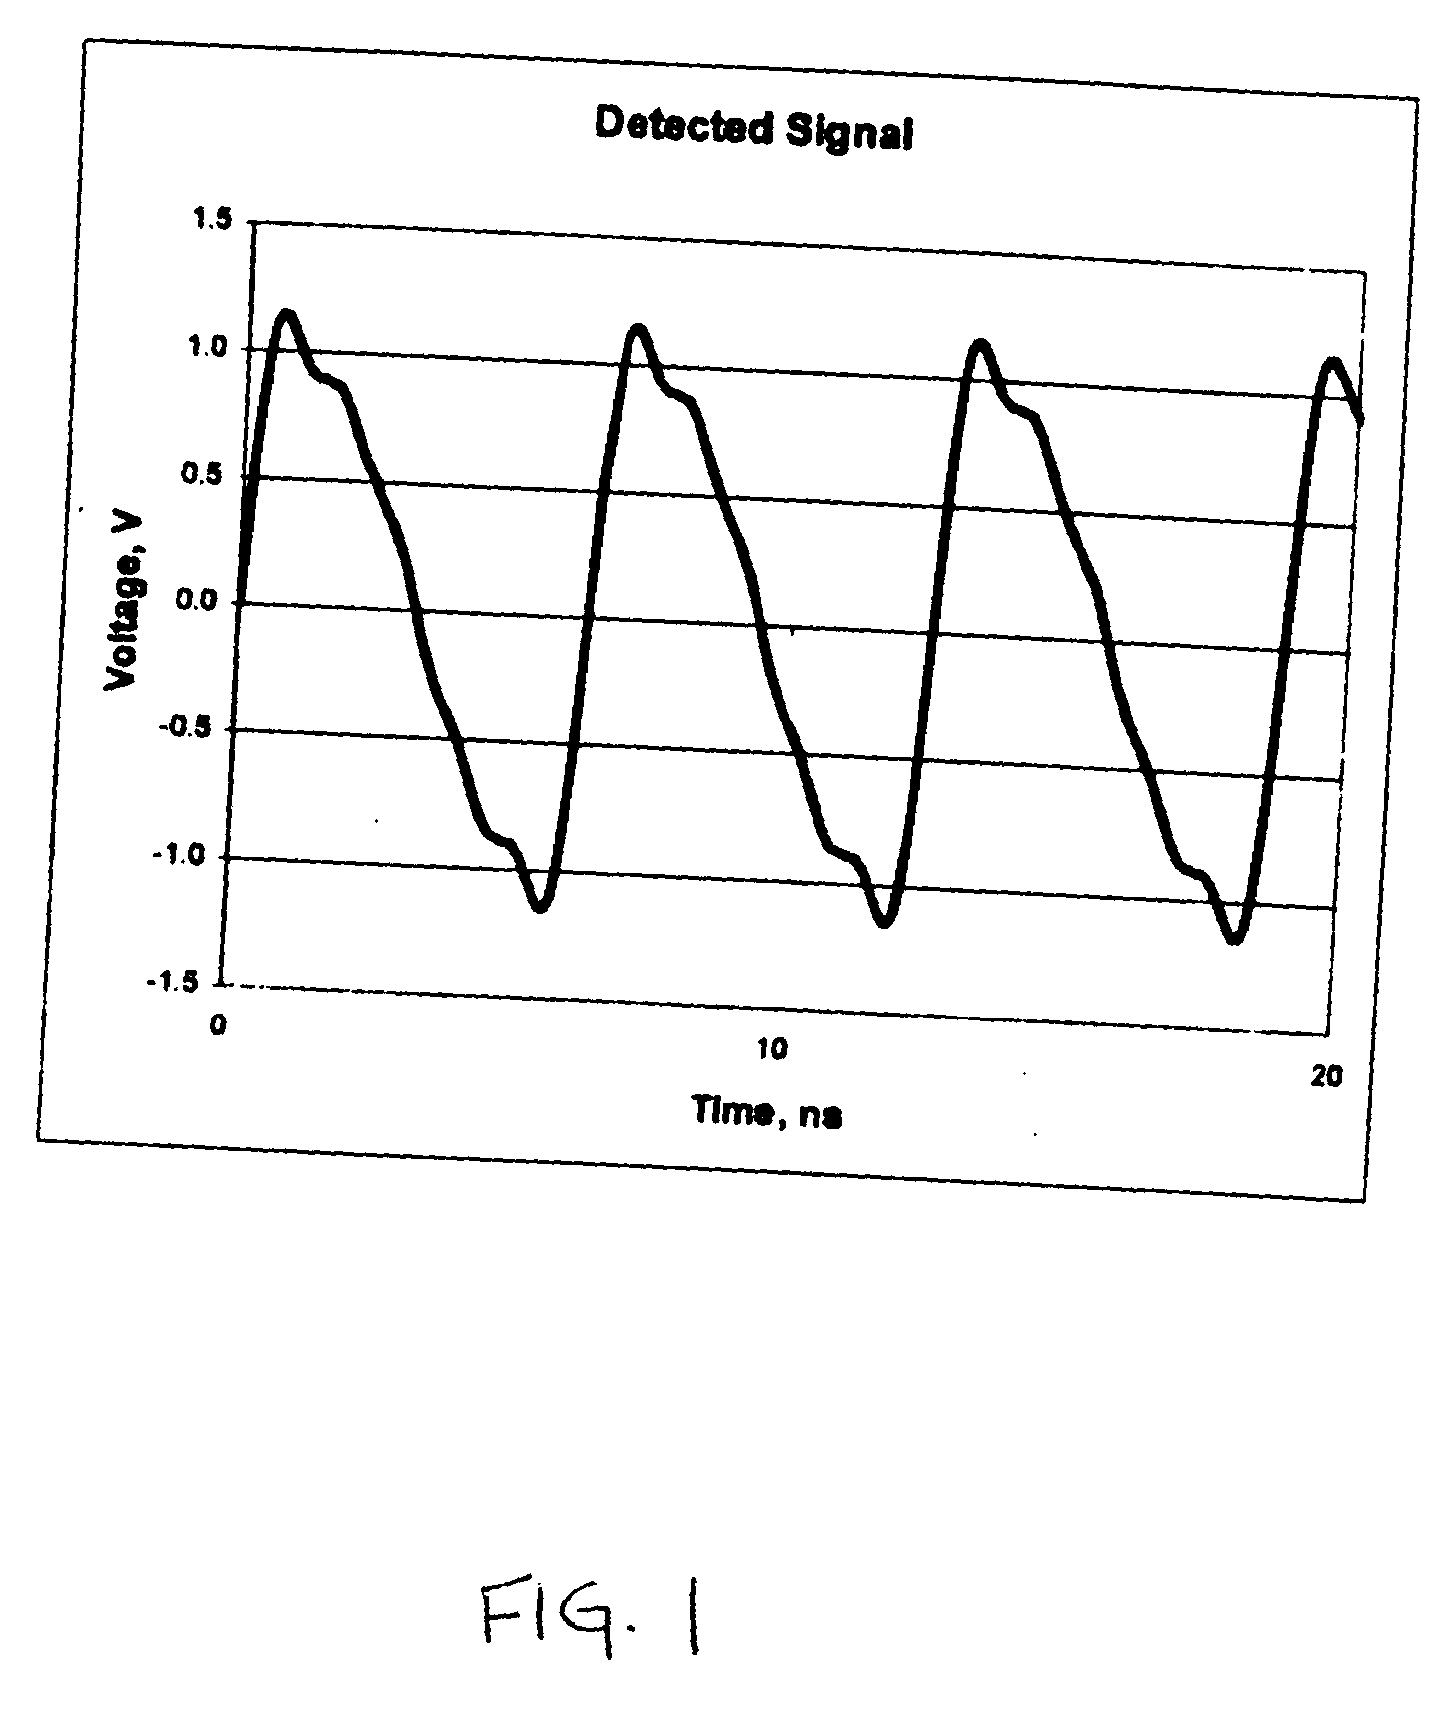 Method of detecting RF power delivered to a load and complex impedance of the load